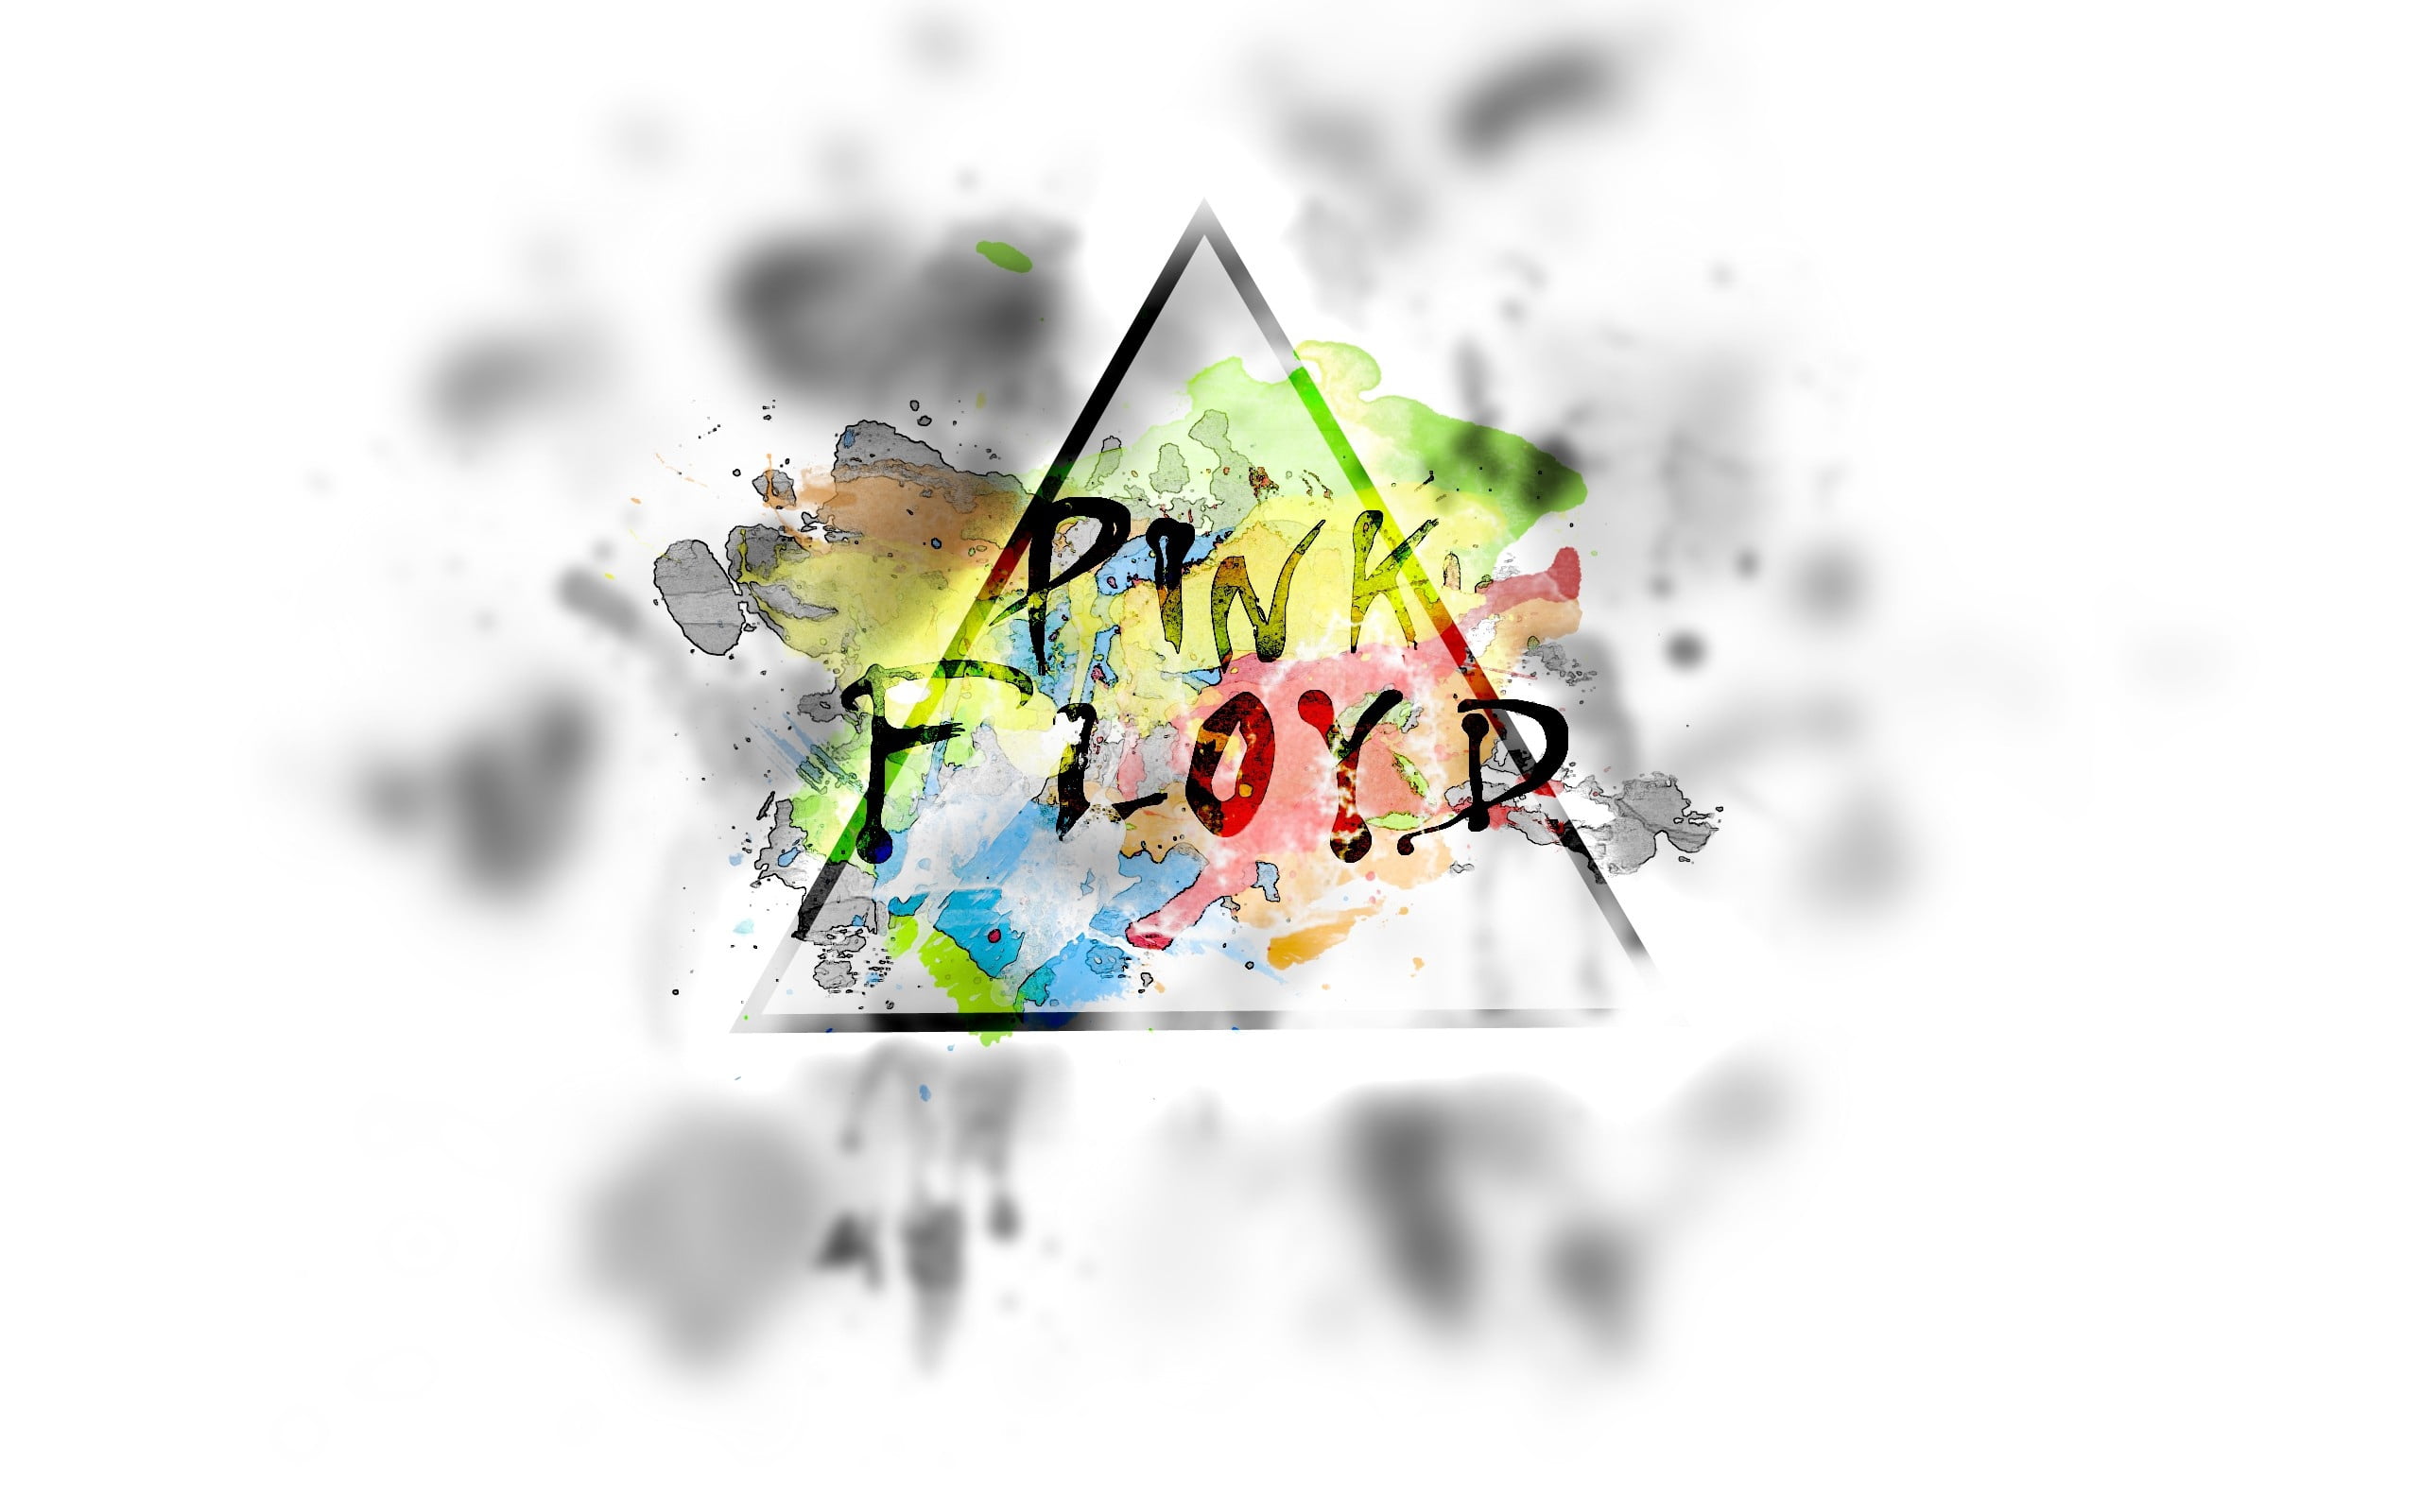 Pink Floyd logo, name, triangle, background, spray, abstract